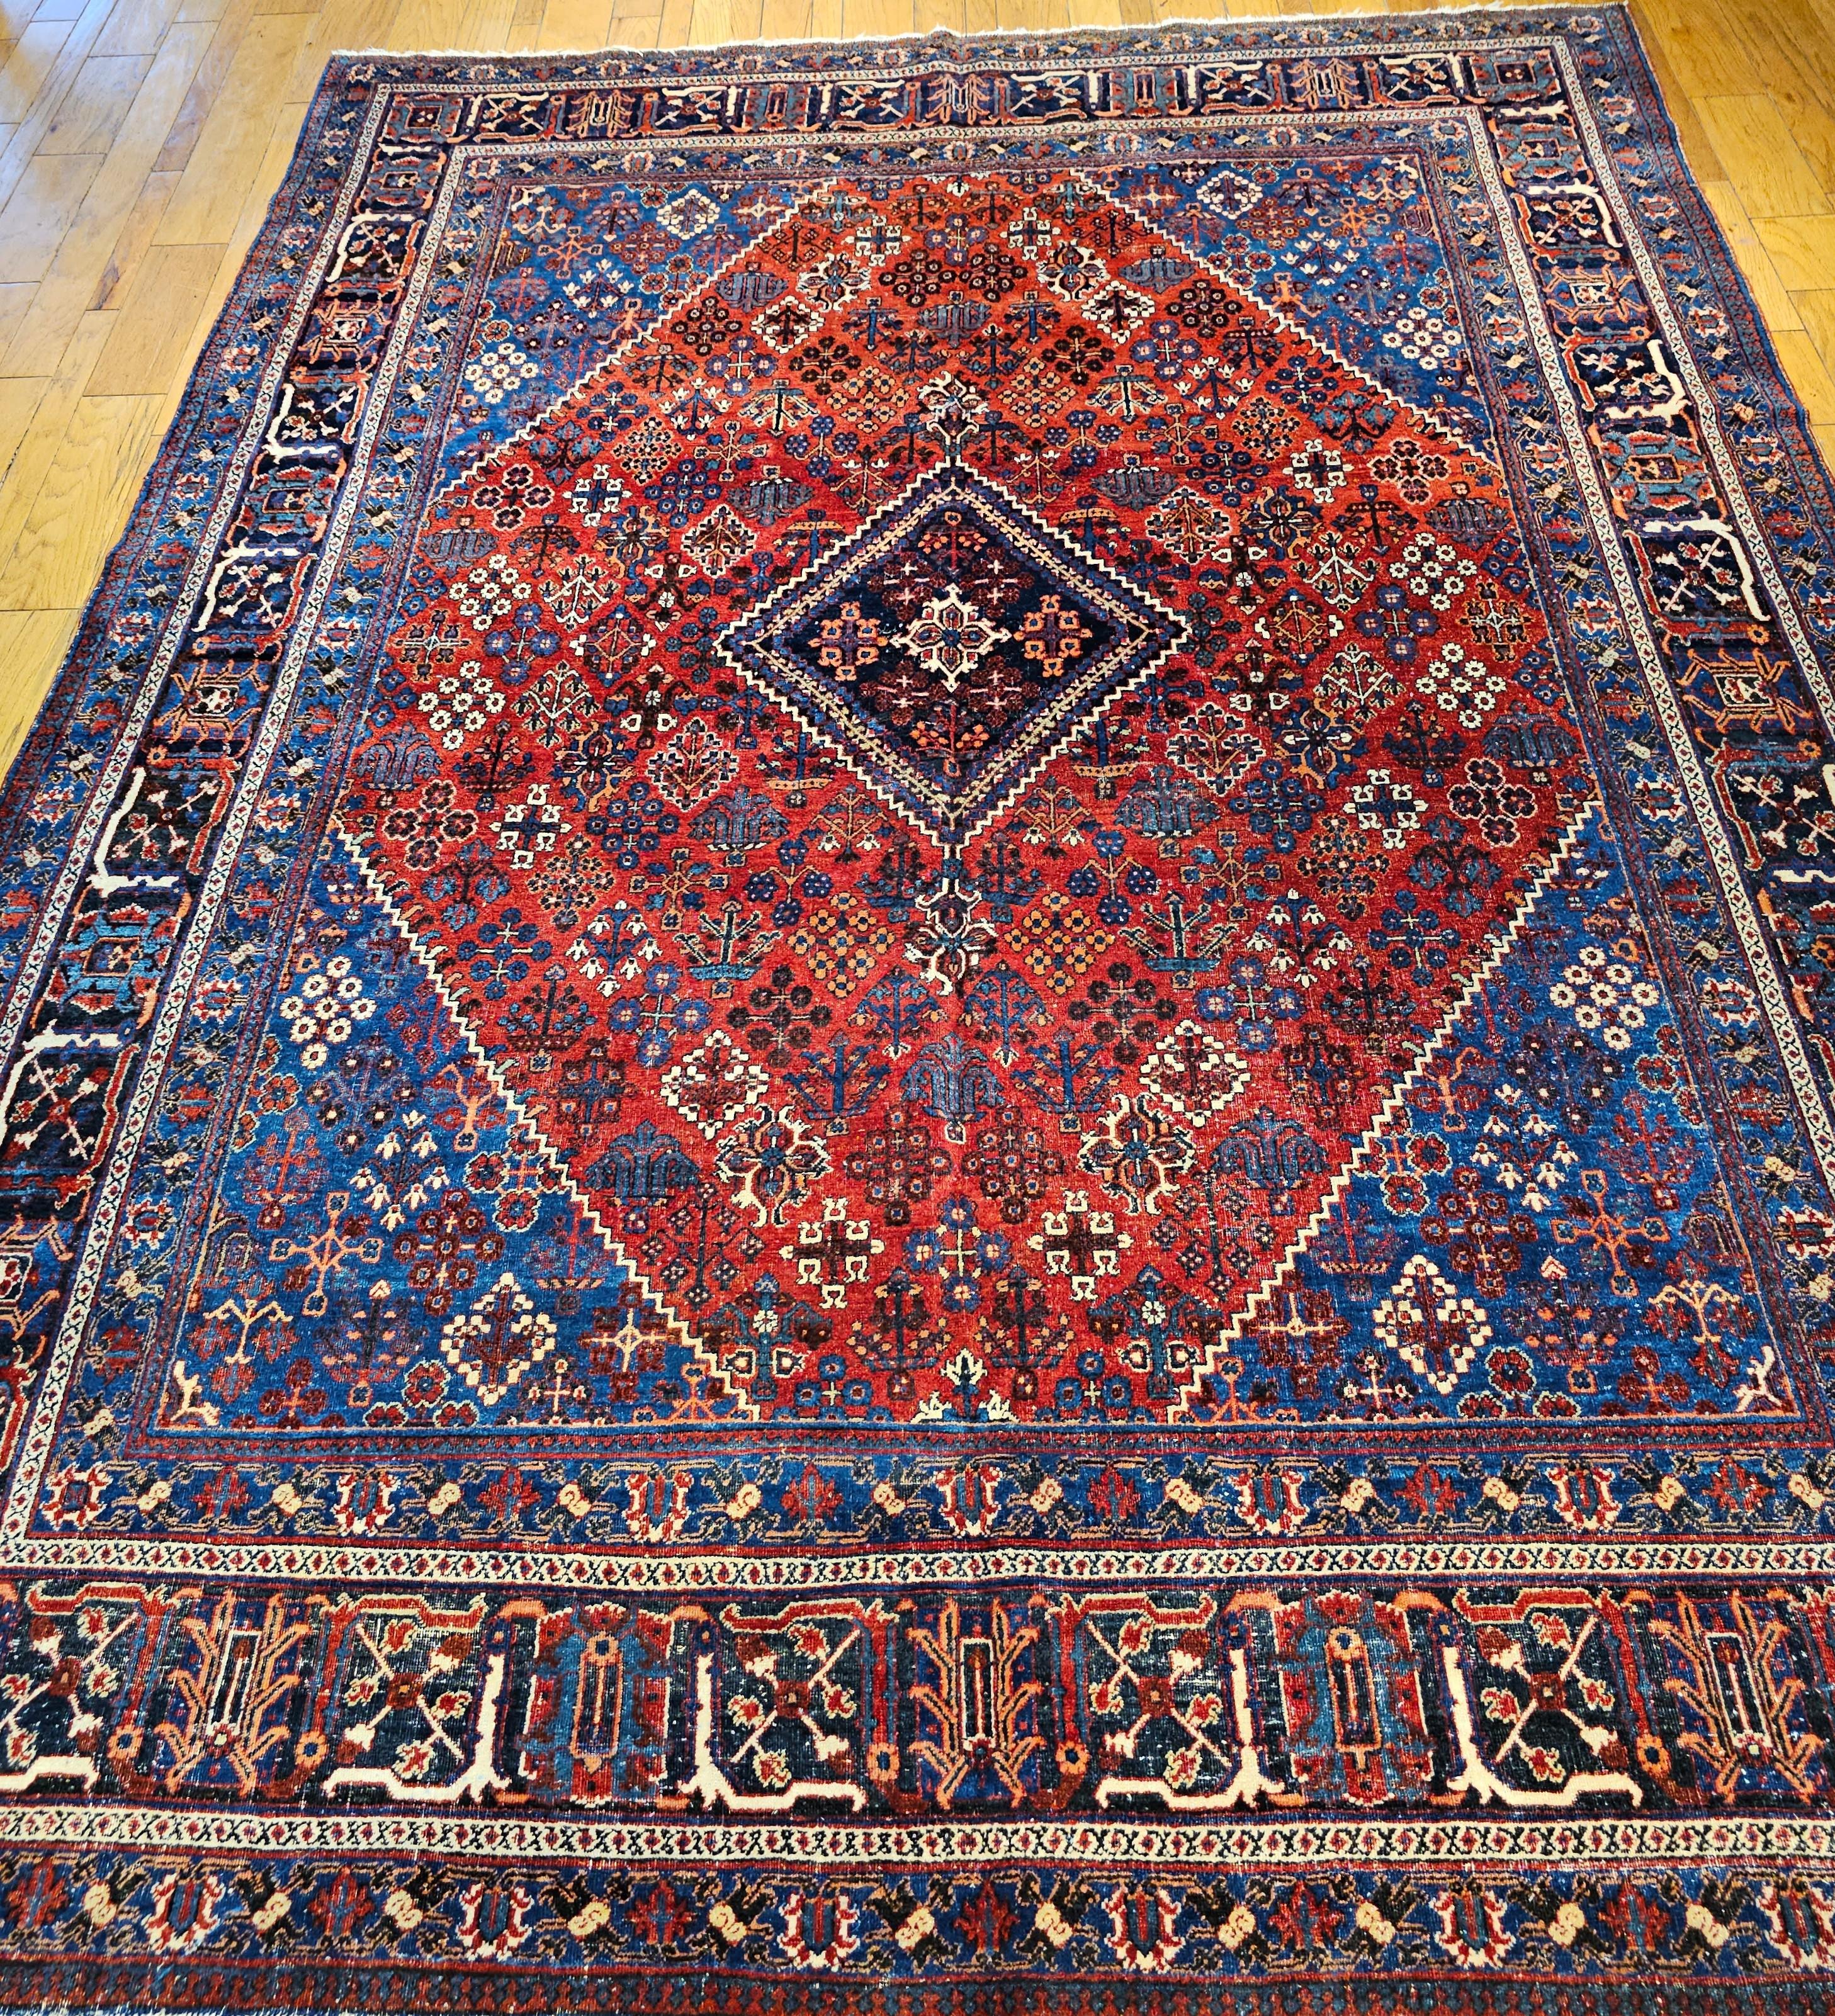 Vintage Persian Joshegan room size rug in a geometric pattern in a rust red background with corner spandrels in French bleu is from the early 1900s.  This amazing antique Joshegan rug from 1920s Iran was handwoven and bears a remarkably unique